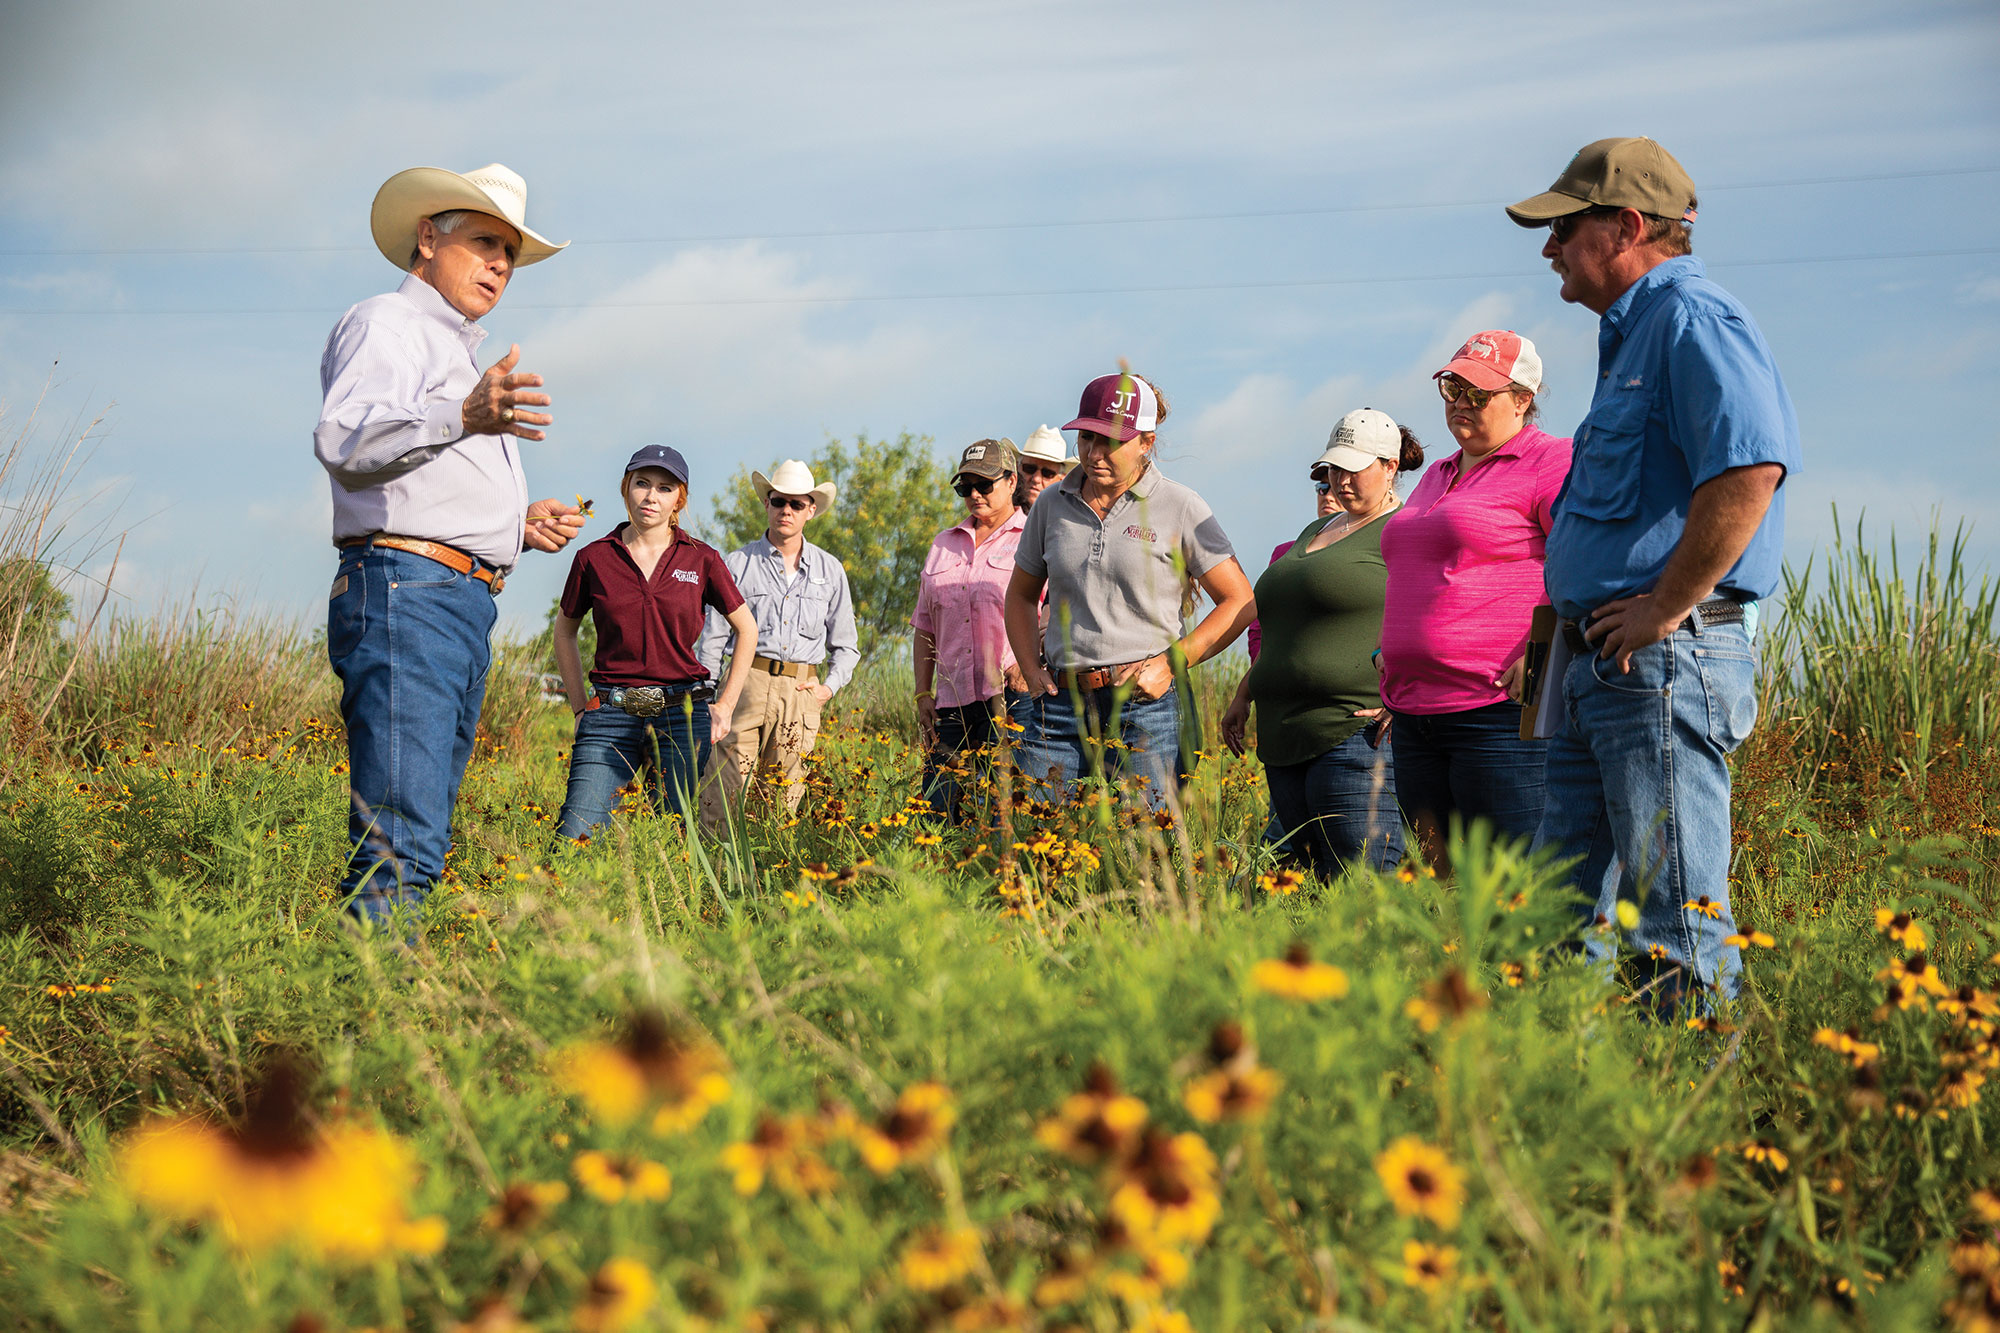 Gary Price (left) discusses soil microbes, water quality and broader beef industry challenges with county extension agents during a tour of his ranch.